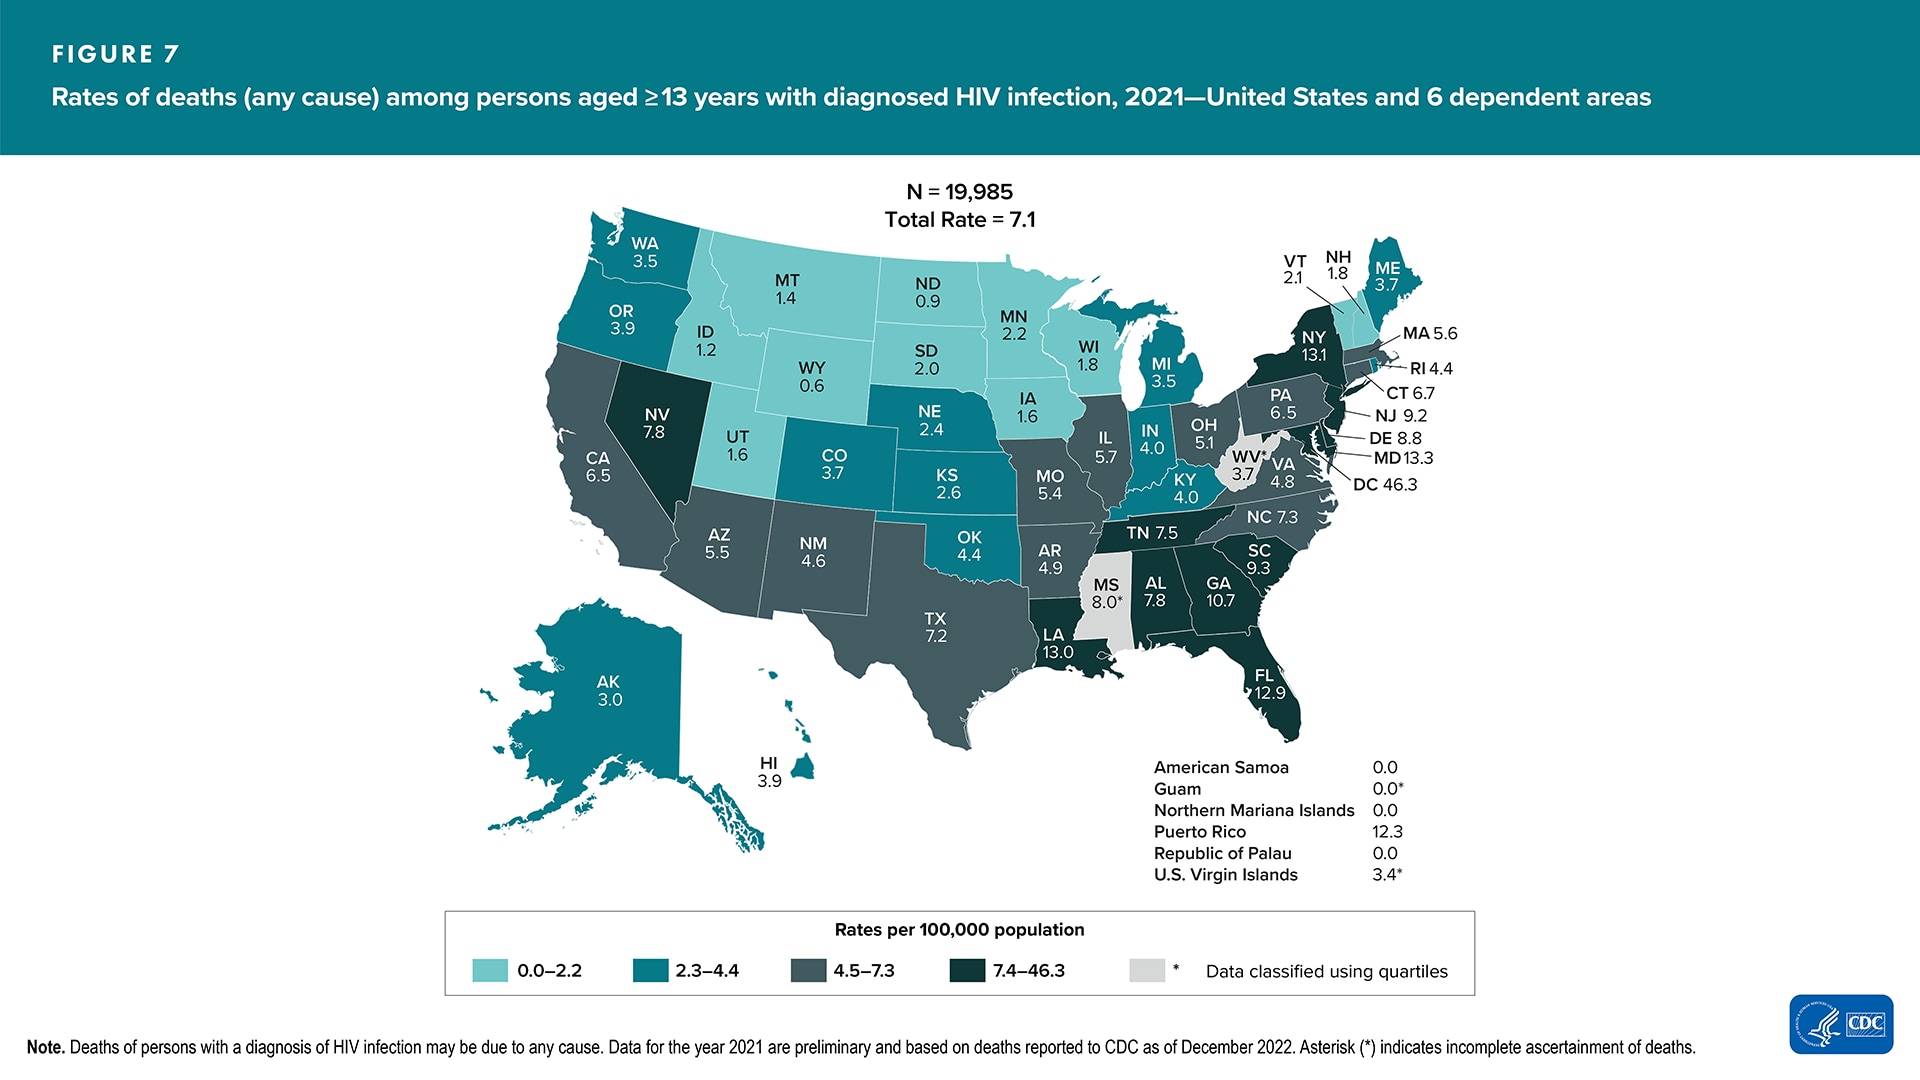 In 2021, in the United States and 6 dependent areas, there were 19,985 deaths (rate: 7.1 per 100,000) among persons aged ≥13 years with diagnosed HIV infection.